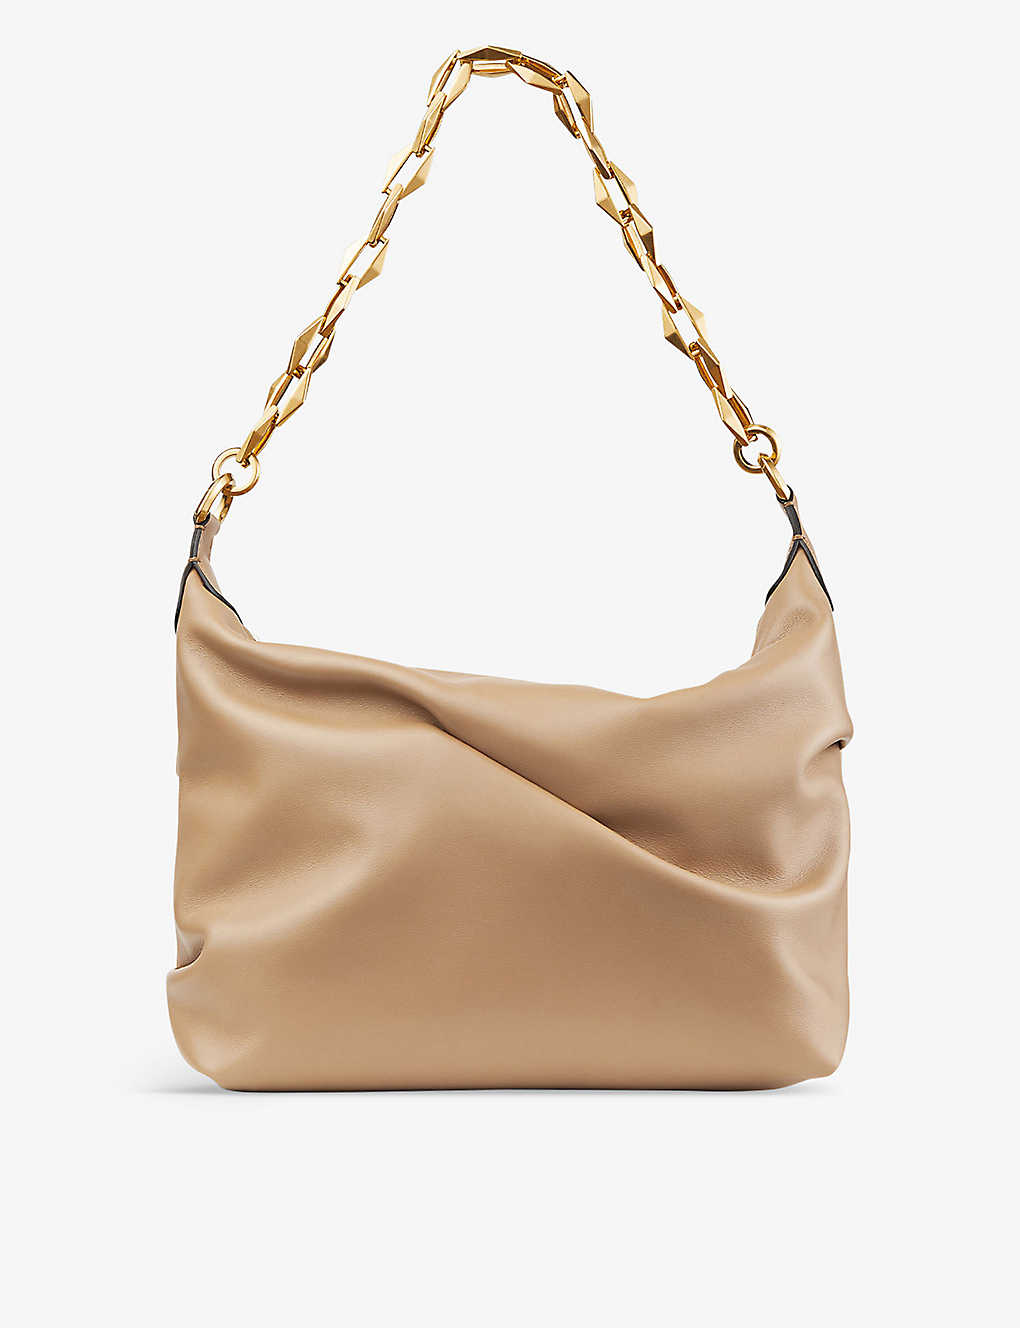 Jimmy Choo Diamond Leather Hobo Bag In Biscuit/gold